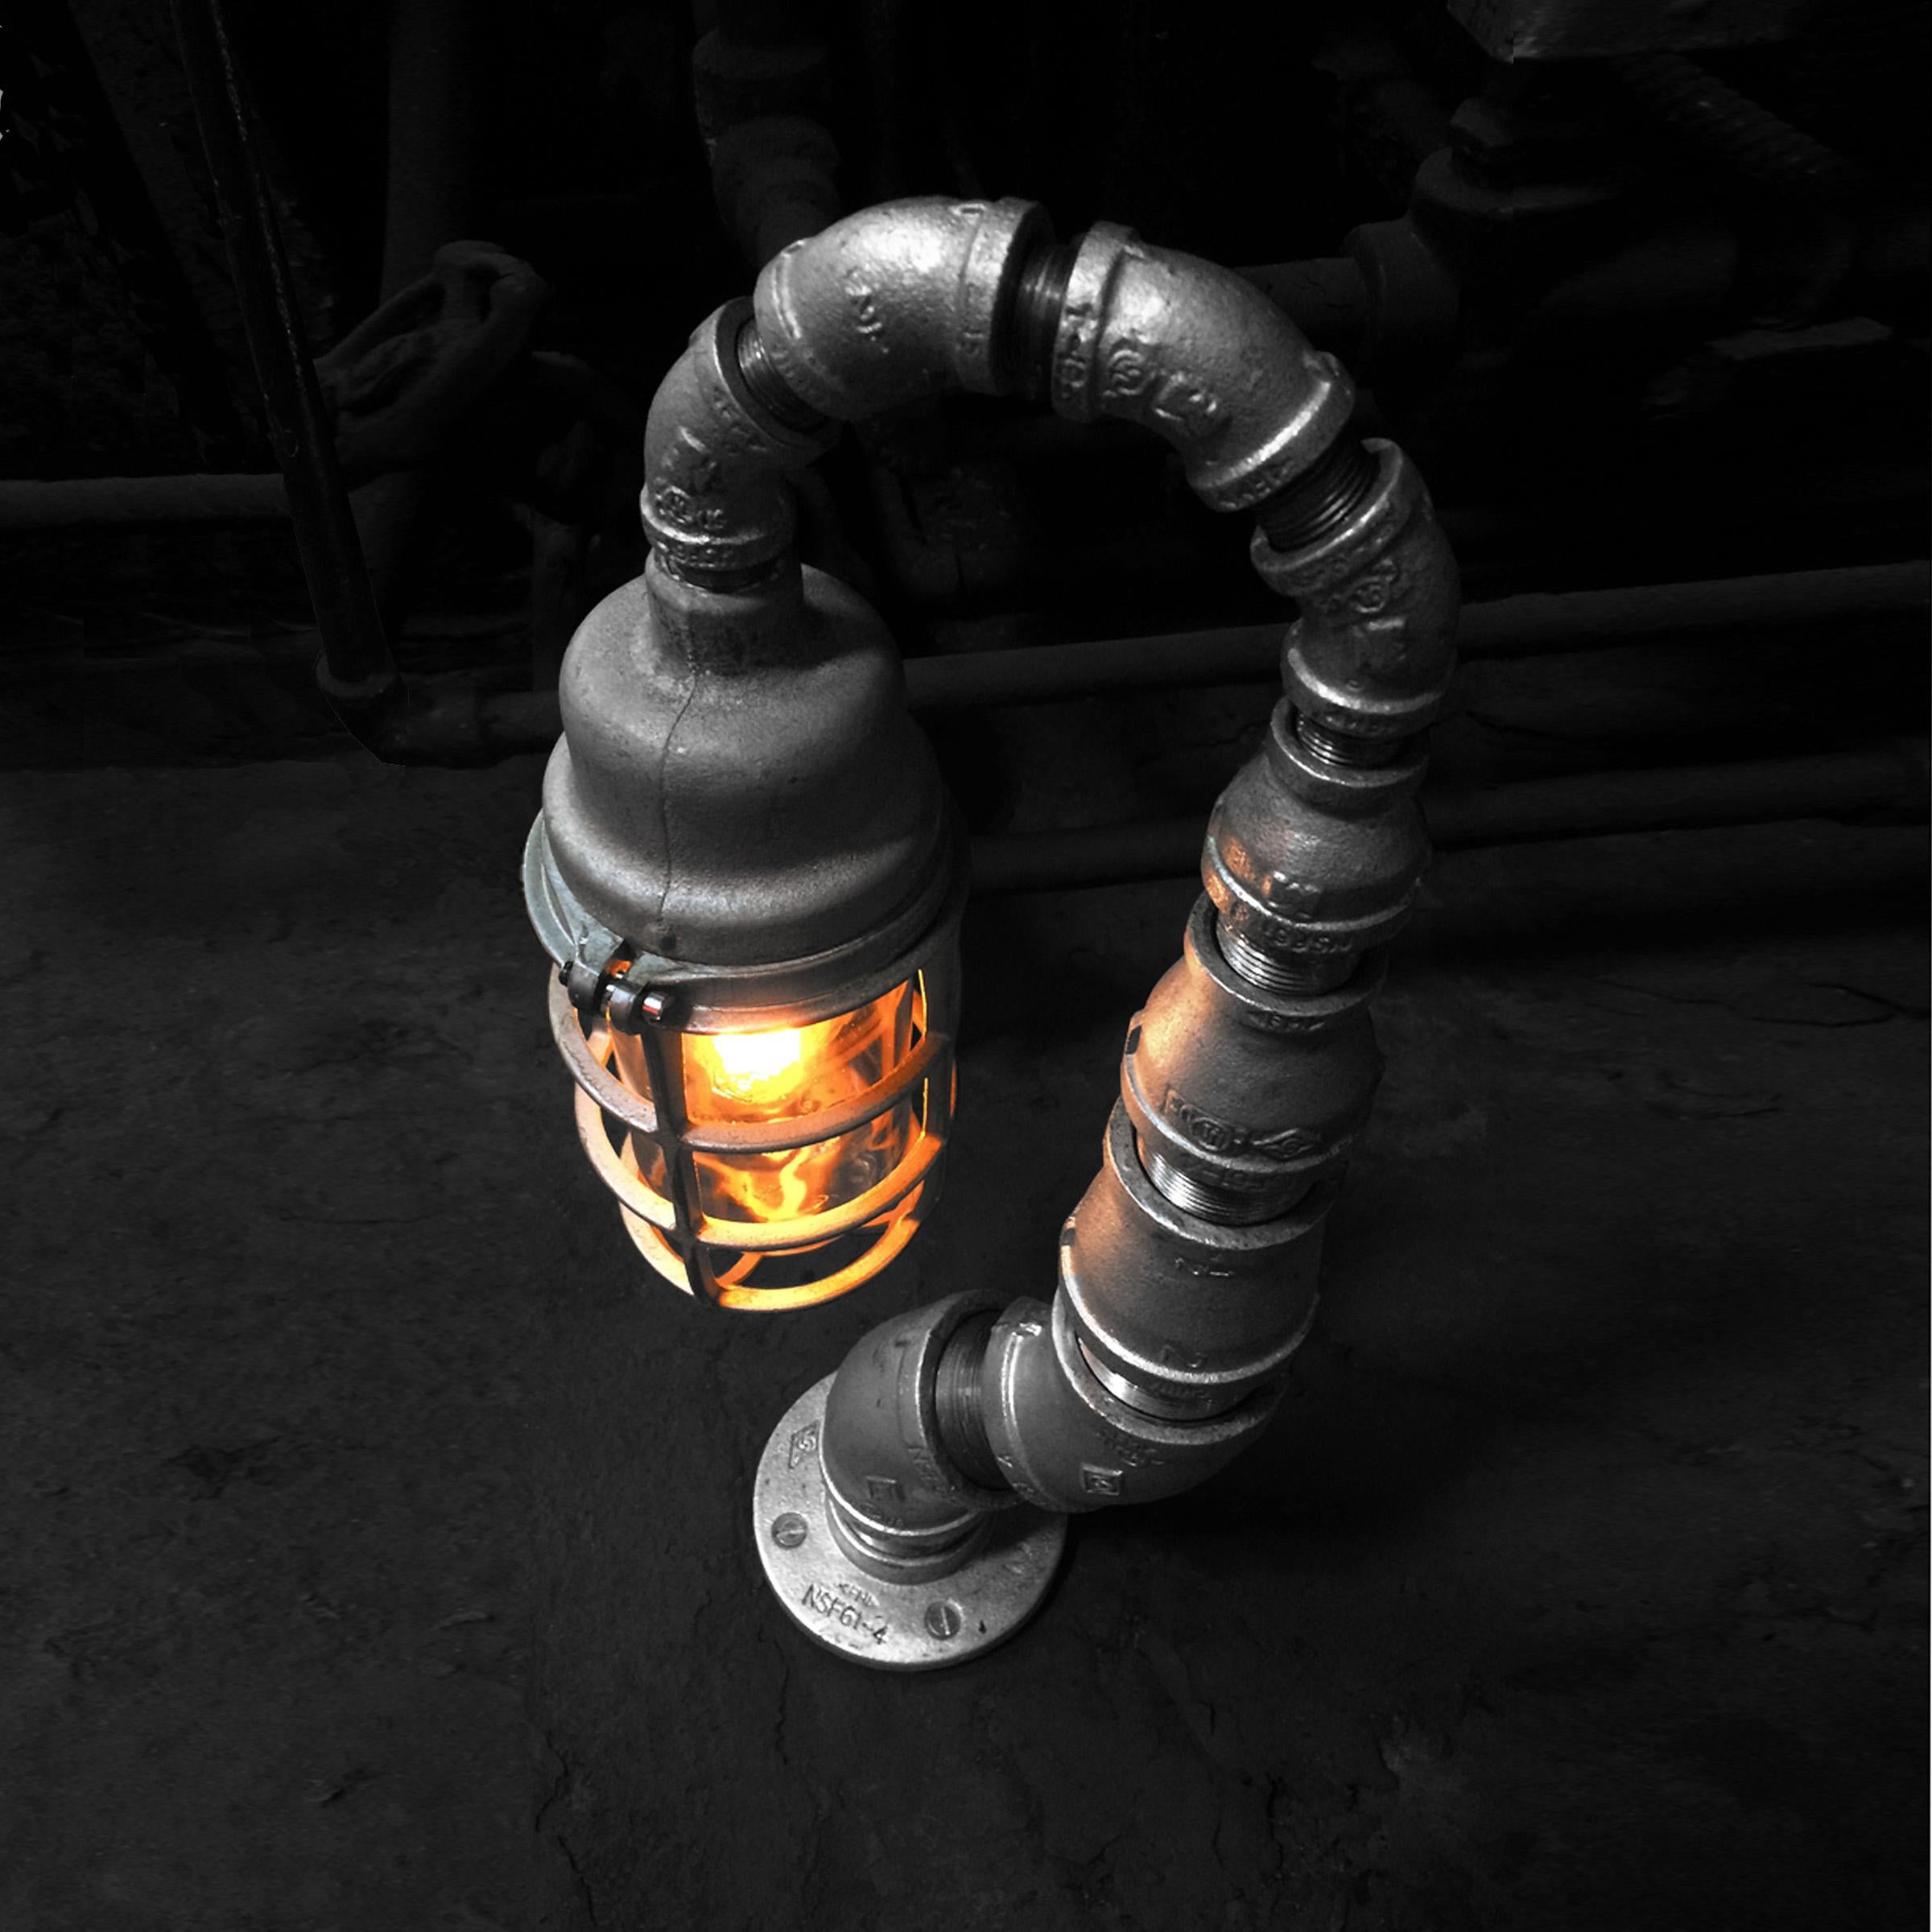 American Modern Industrial Table Lamp - Industrial Decor - Crouse Hinds Industrial Light For Sale